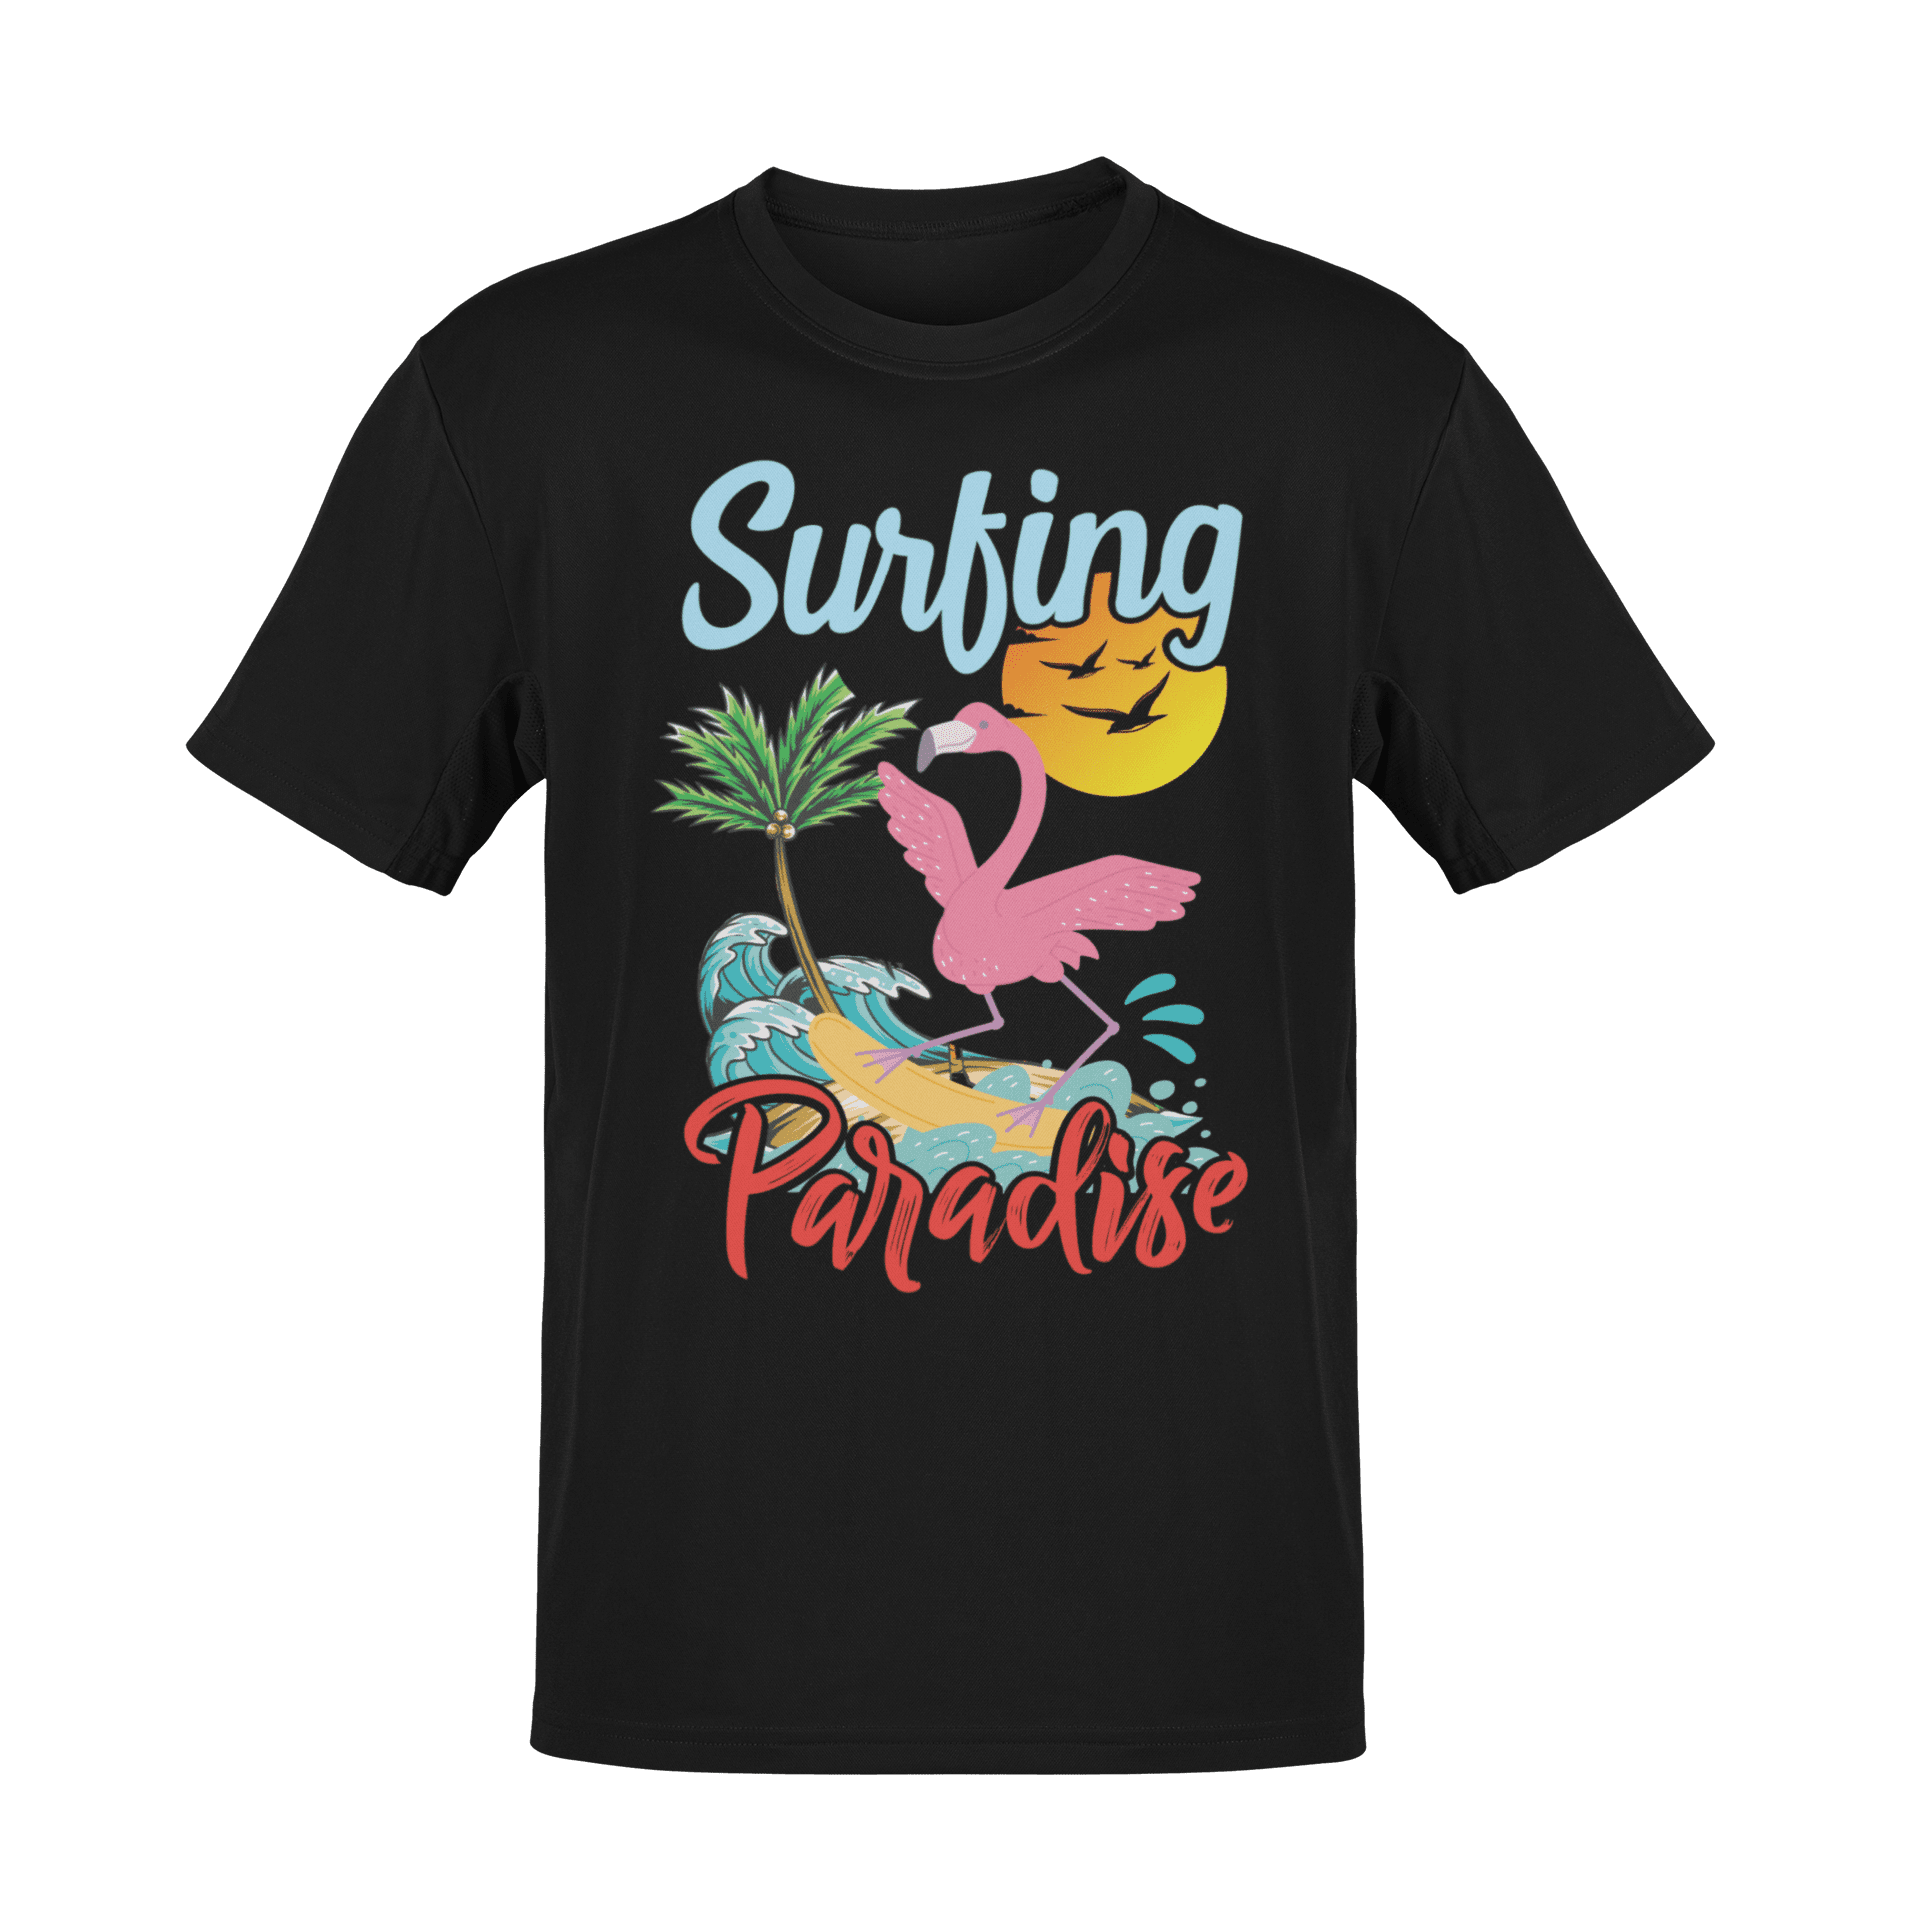 Surfing paradise